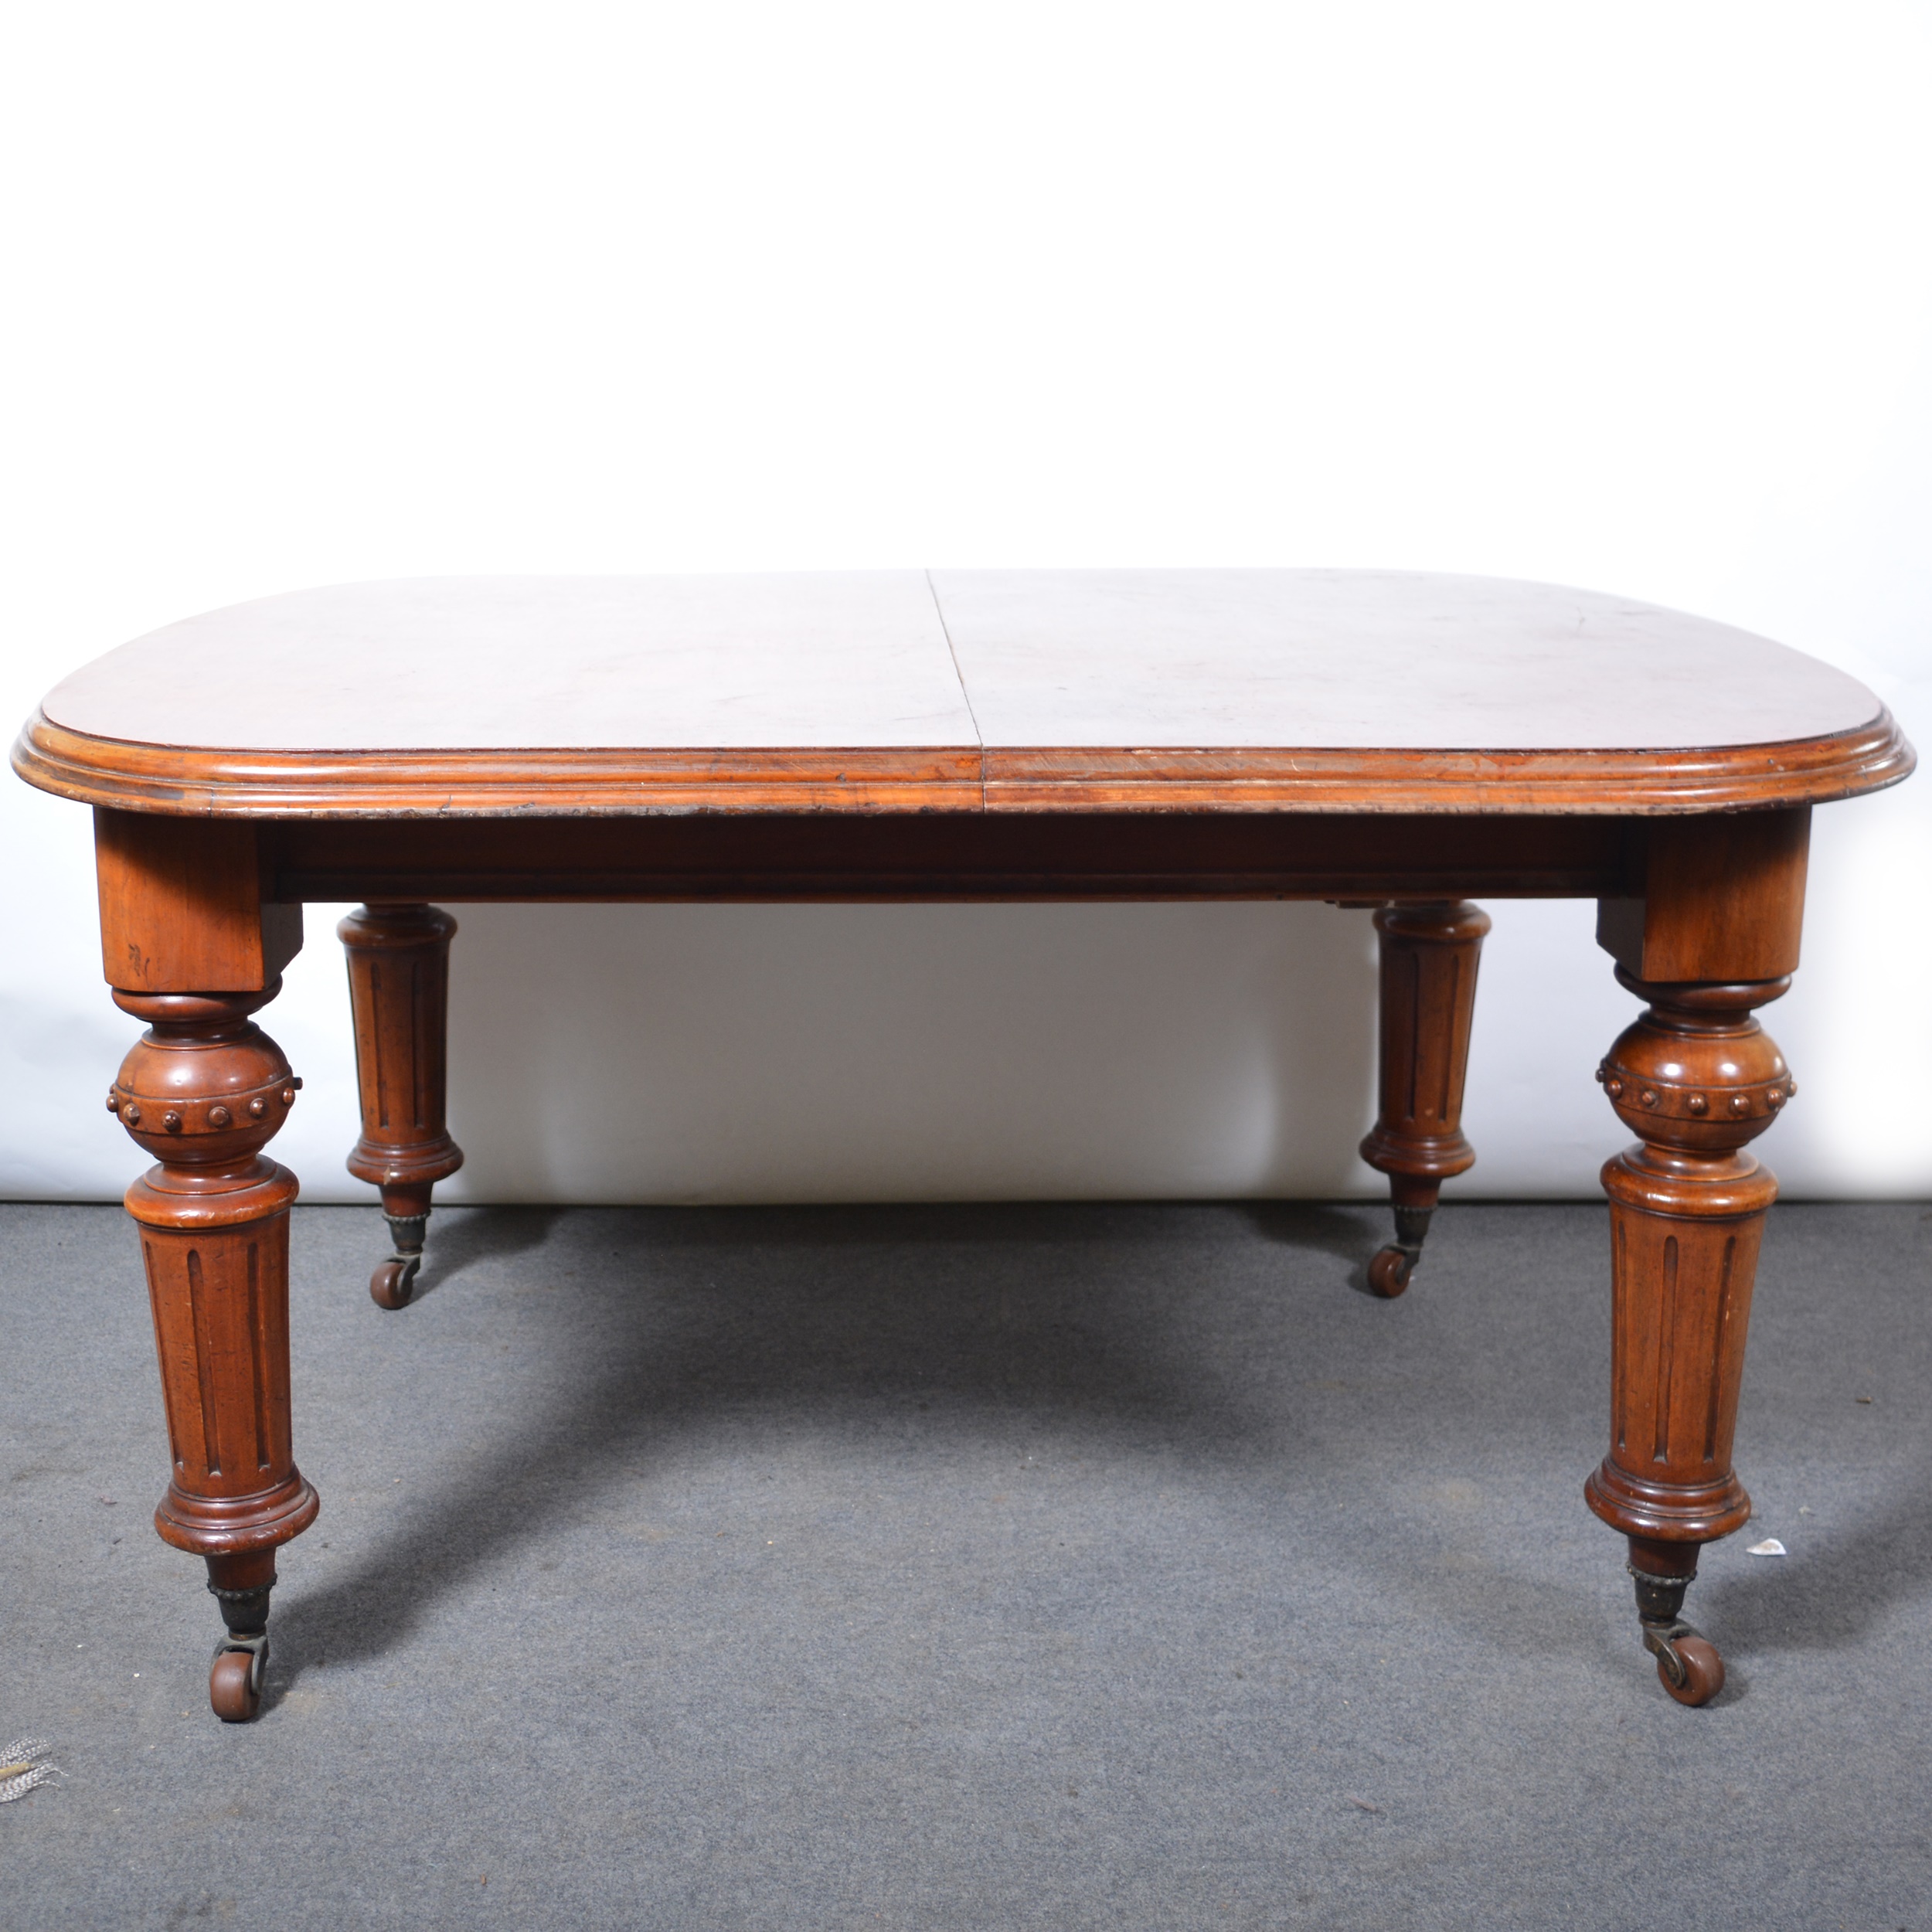 Victorian mahogany wind-out dining table,